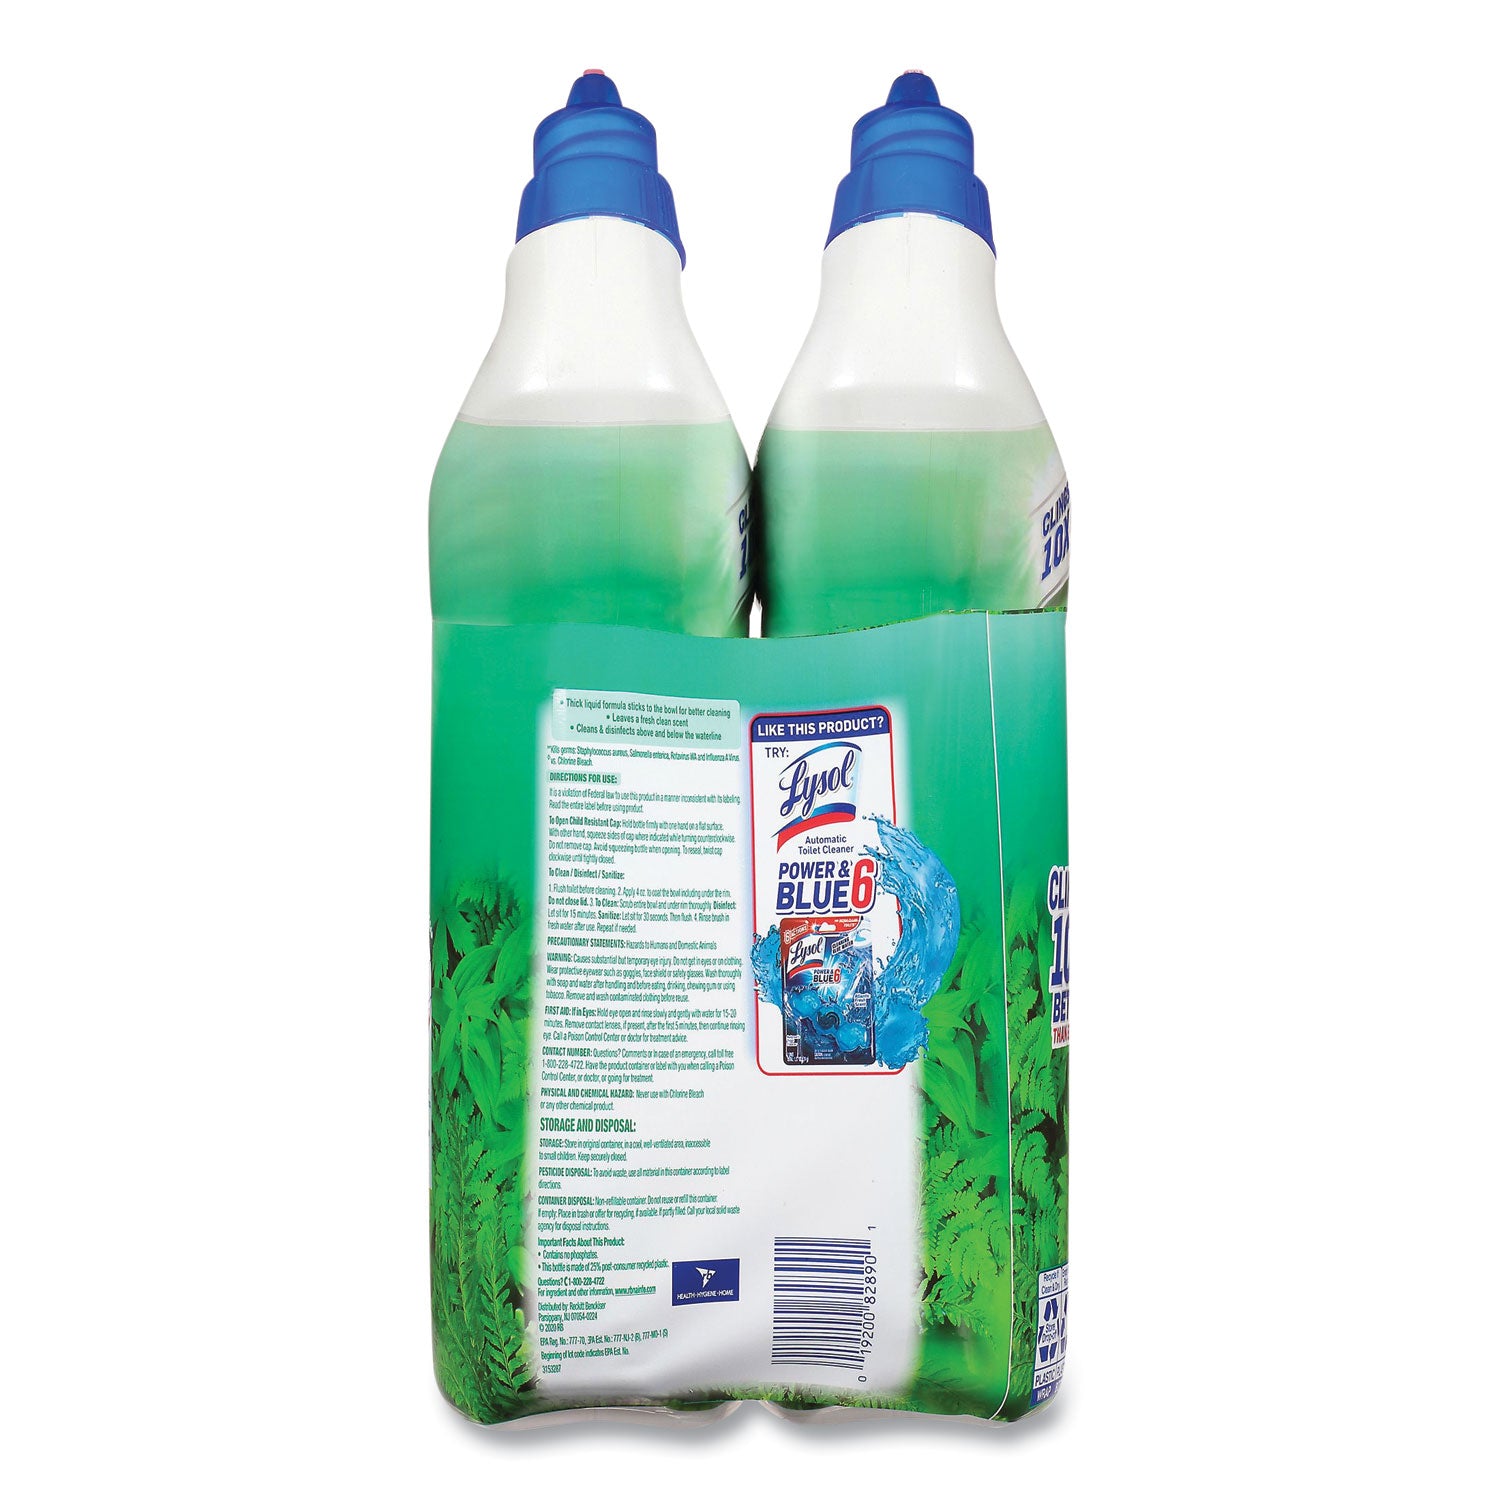 cling-and-fresh-toilet-bowl-cleaner-forest-rain-scent-24-oz-2-pack-4-packs-carton_rac98015 - 2